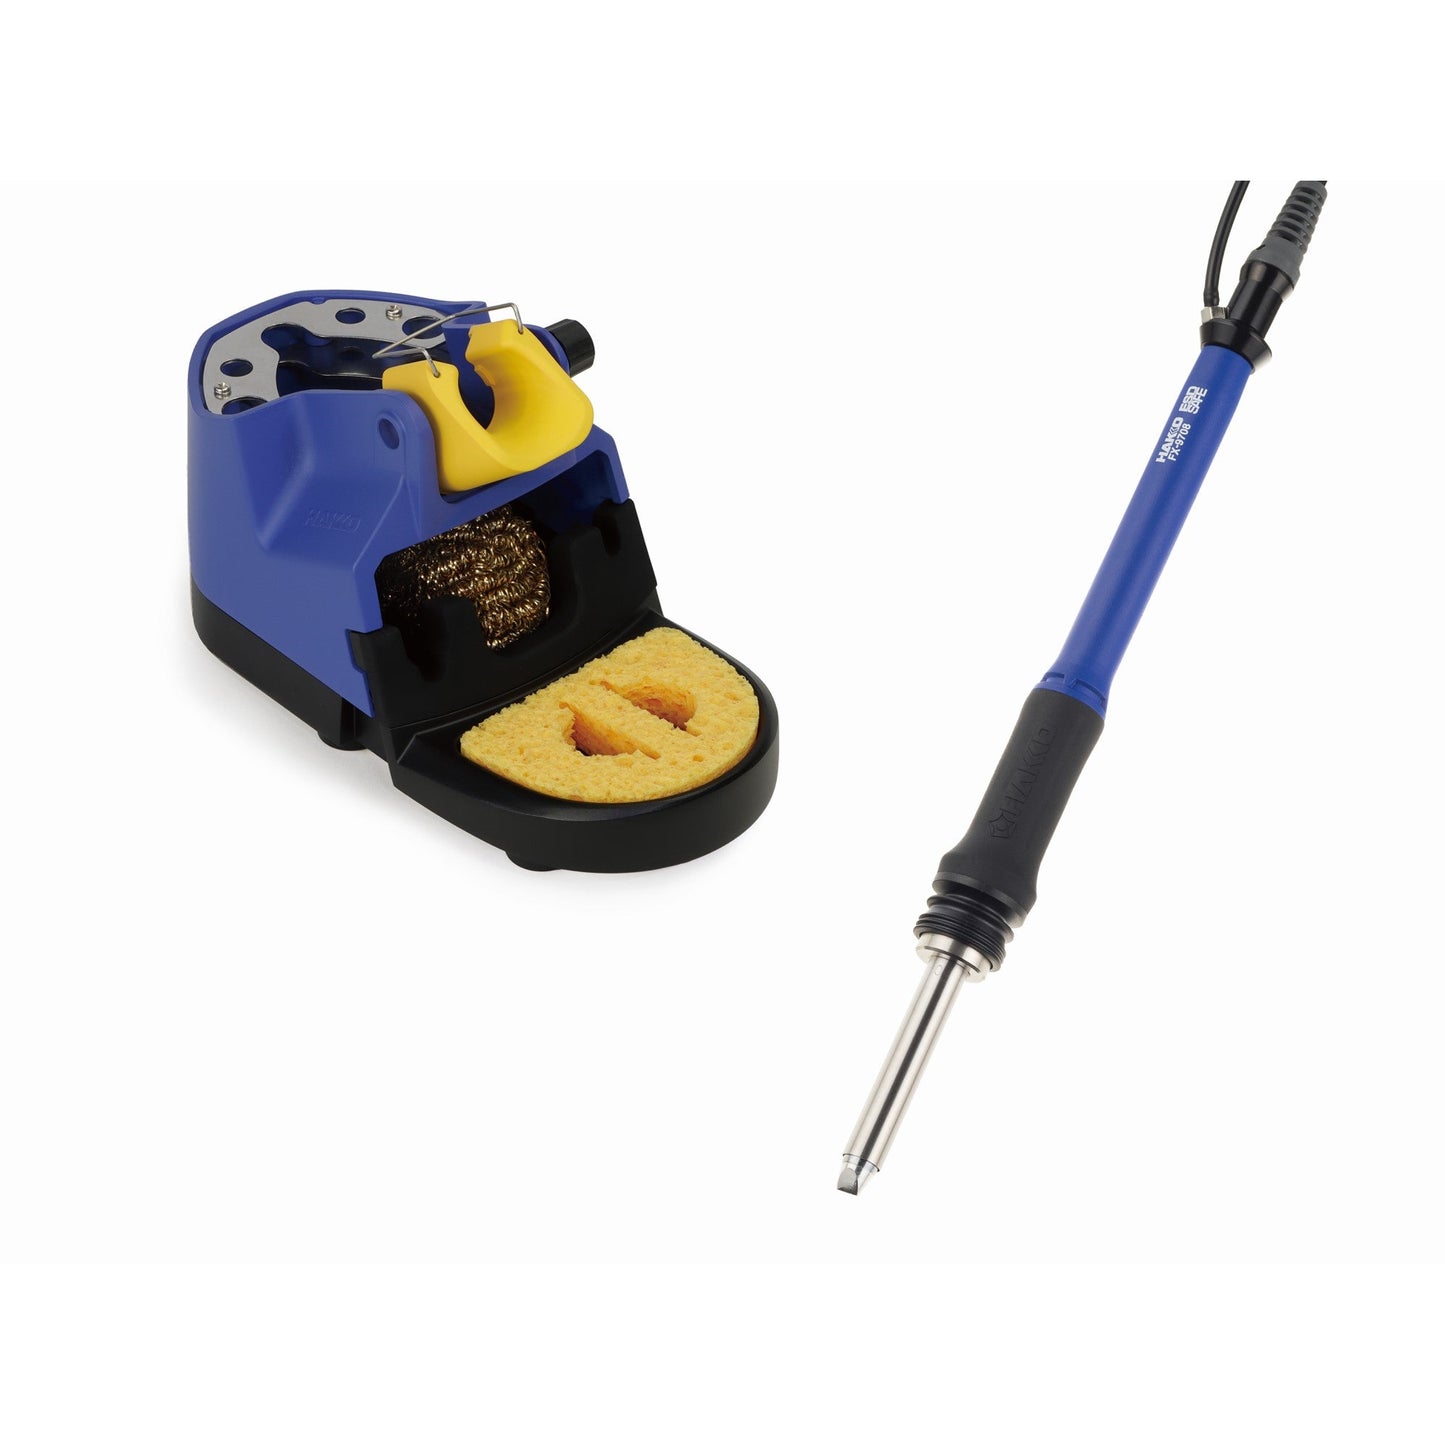 Hakko soldering iron FX970-82 conversion kit heavy duty included with iron stand and cleaning wire and wet sponge for hand soldering rework process